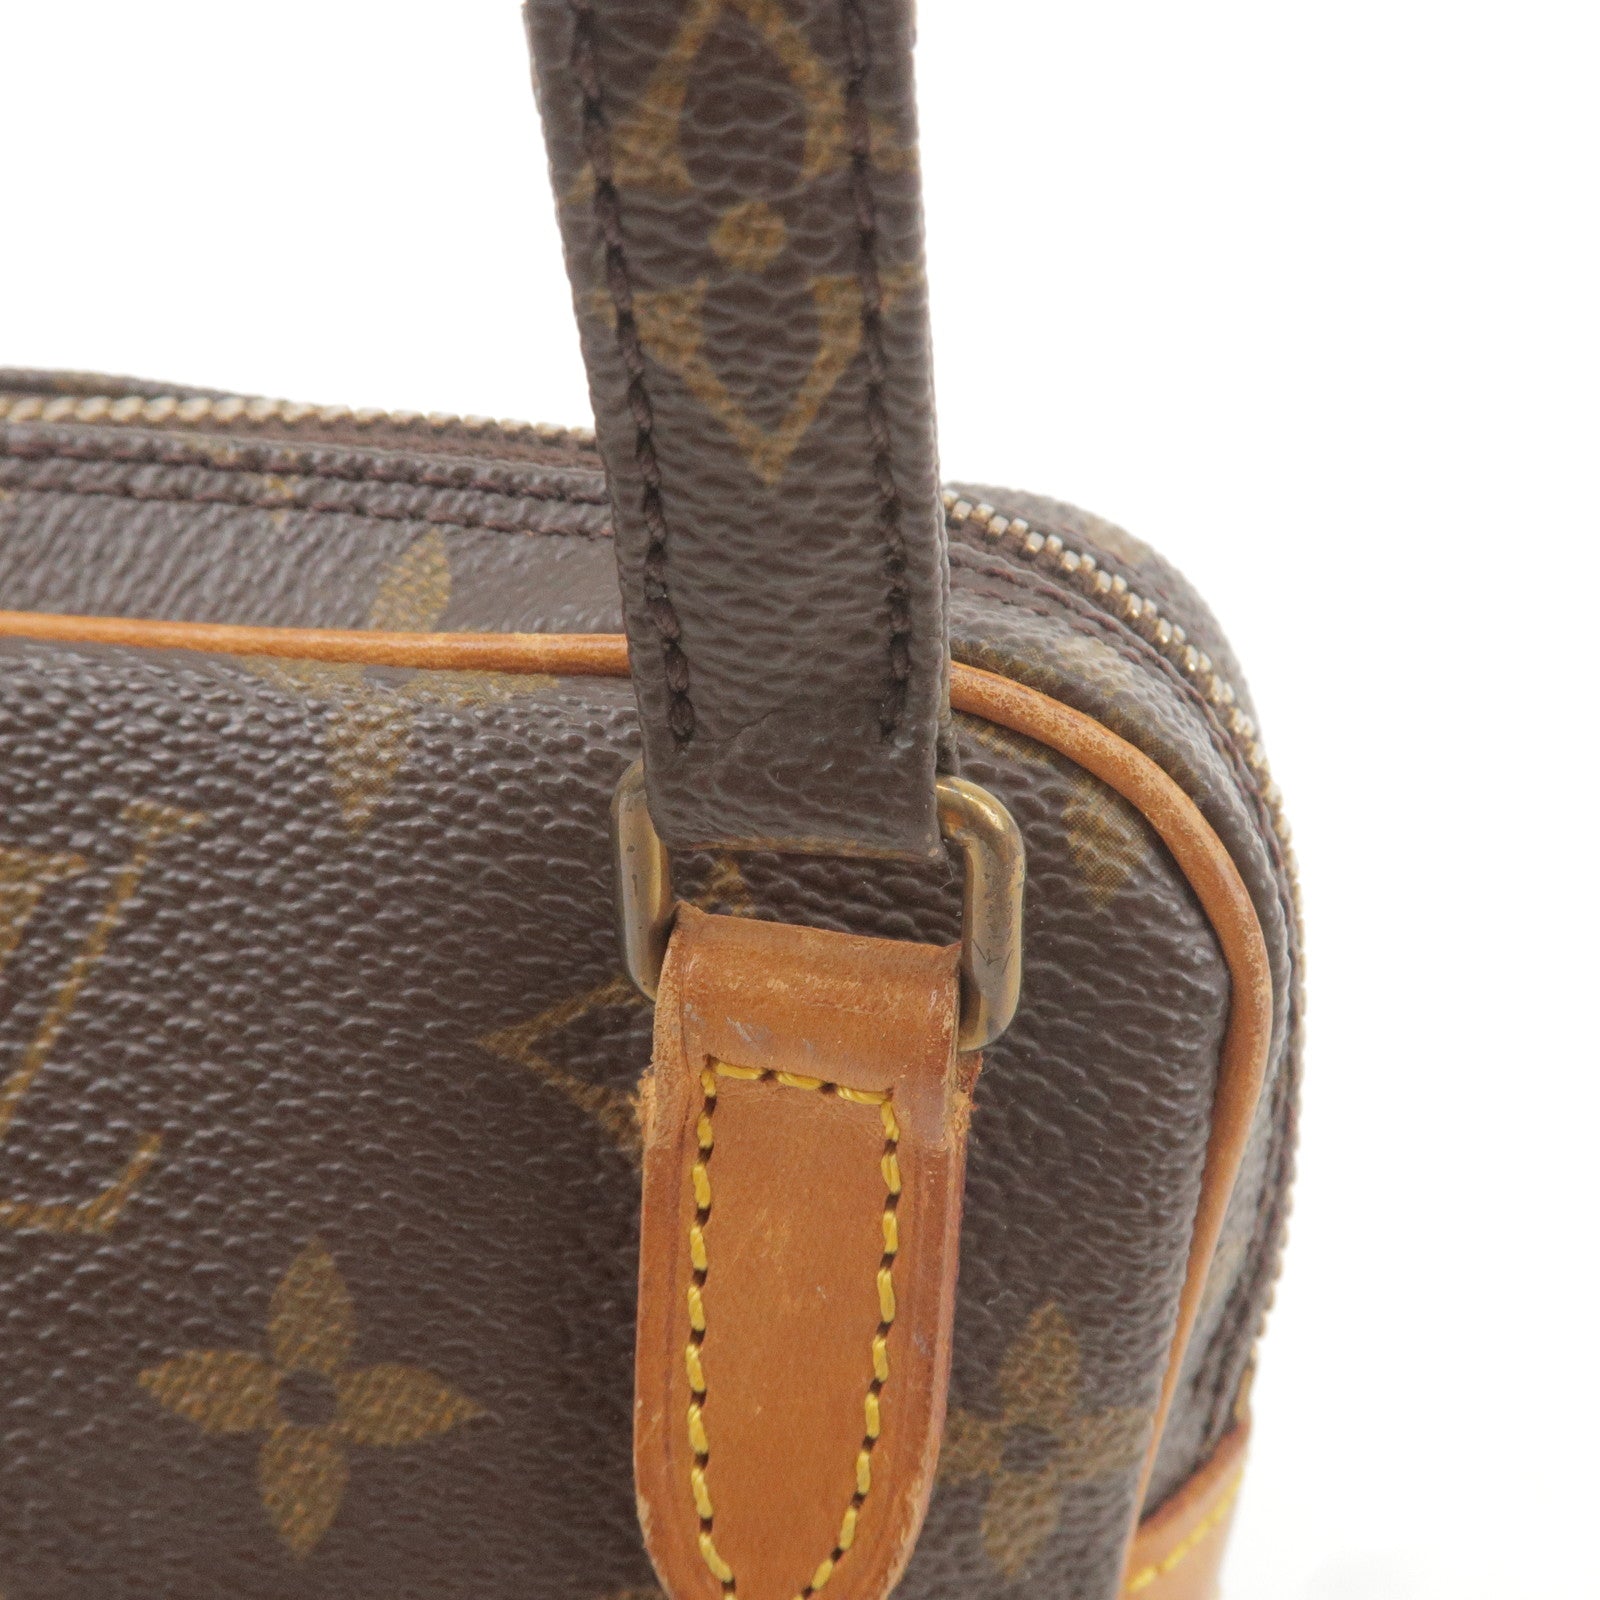 Buy [Used] LOUIS VUITTON Pochette Marly Bandouliere Shoulder Bag Monogram  M51828 from Japan - Buy authentic Plus exclusive items from Japan